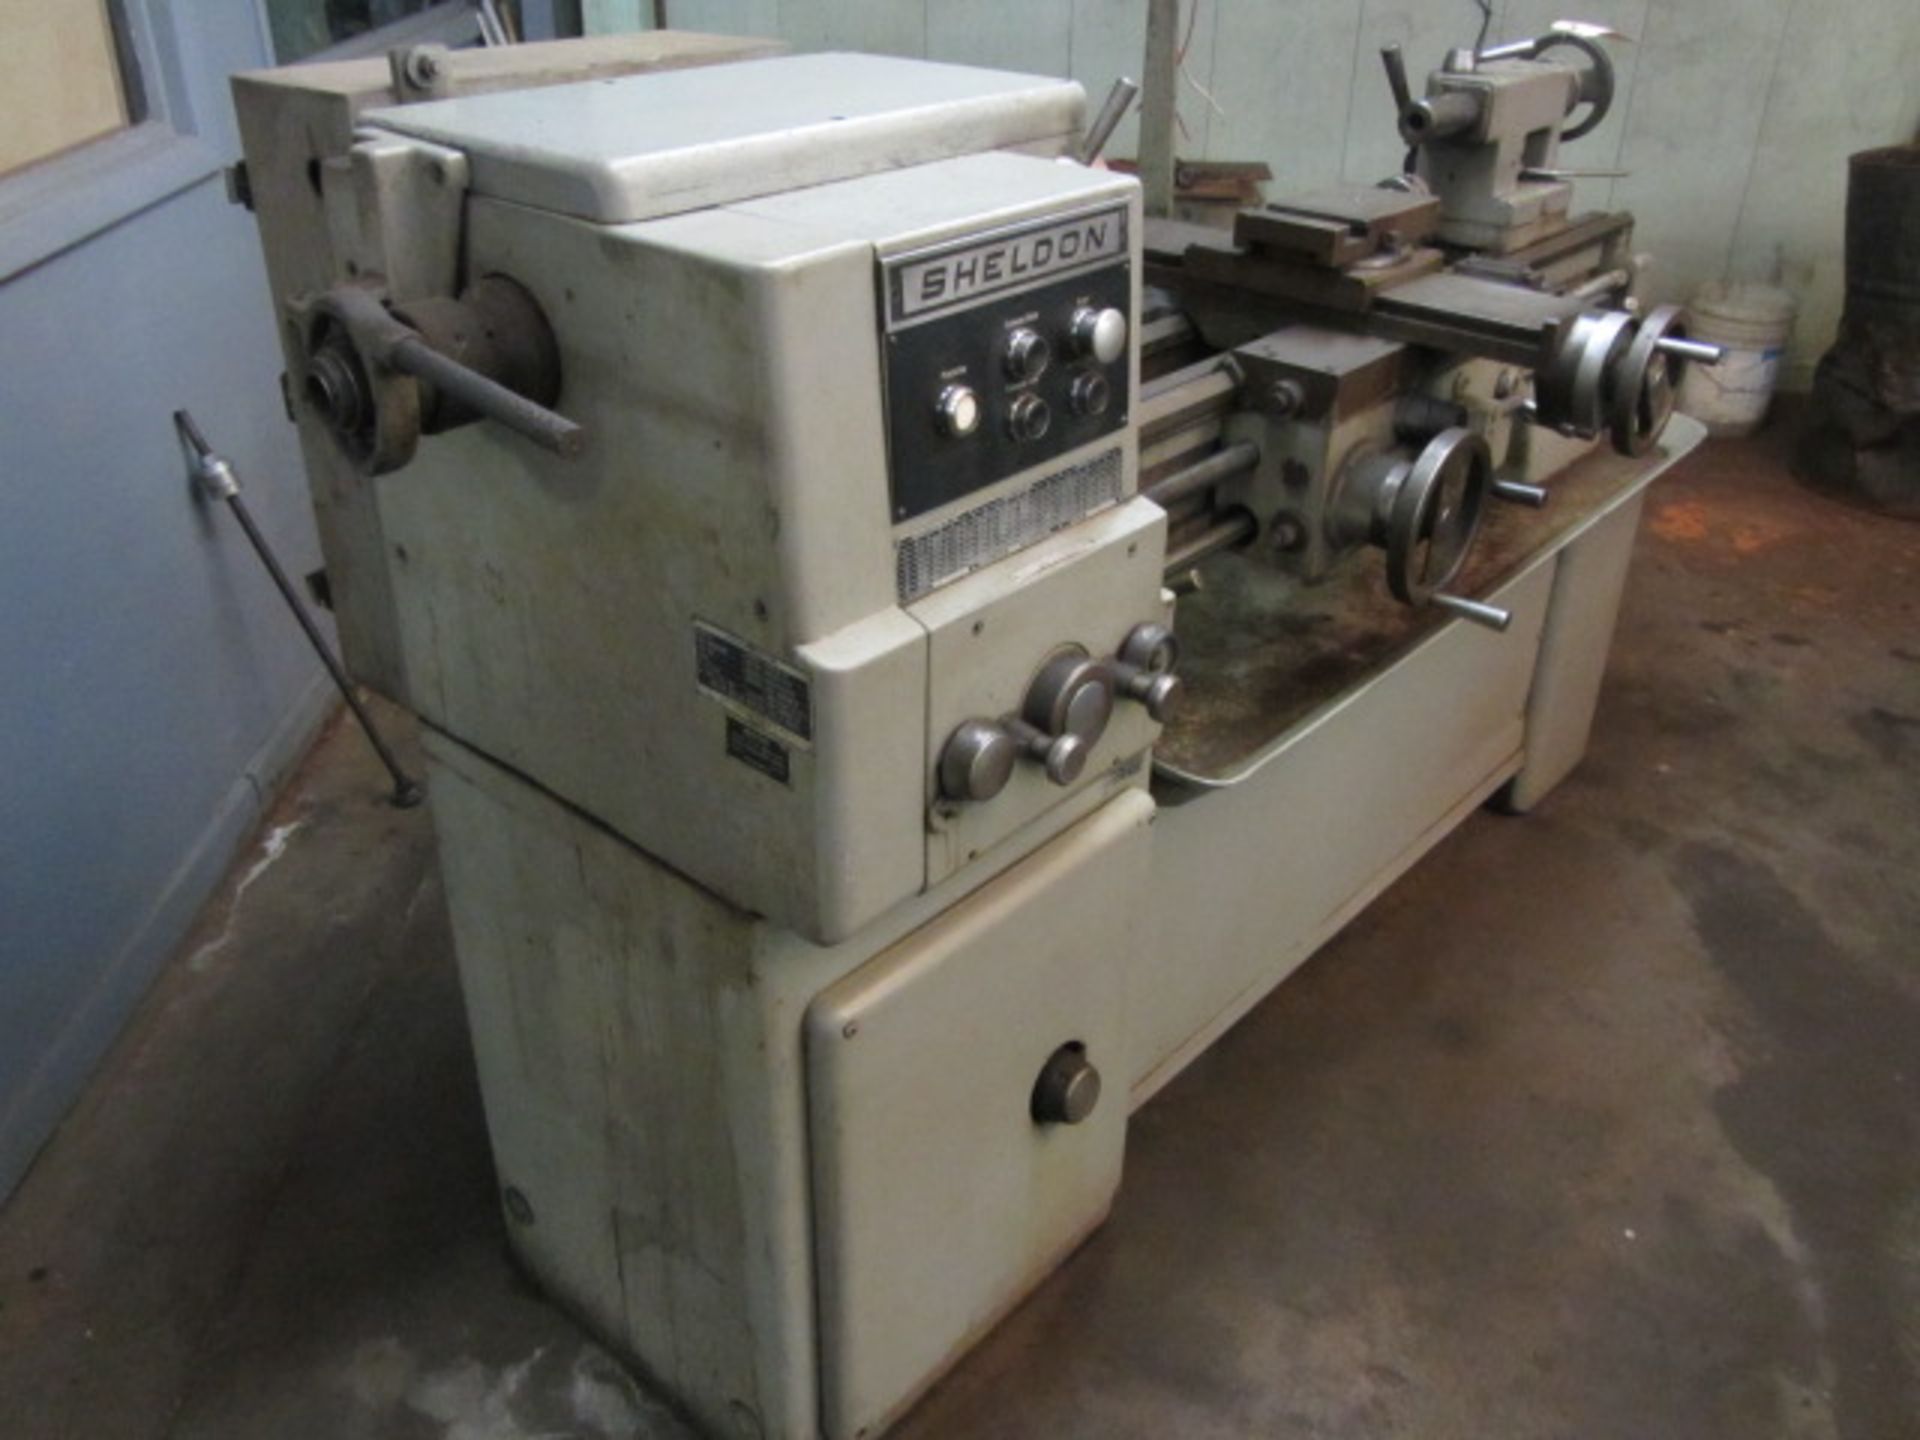 Sheldon Model 15 16'' x 46'' CC Engine Lathe with Spindle Speeds to 1250 RPM, Chip Pan, 5C Collet - Image 6 of 6